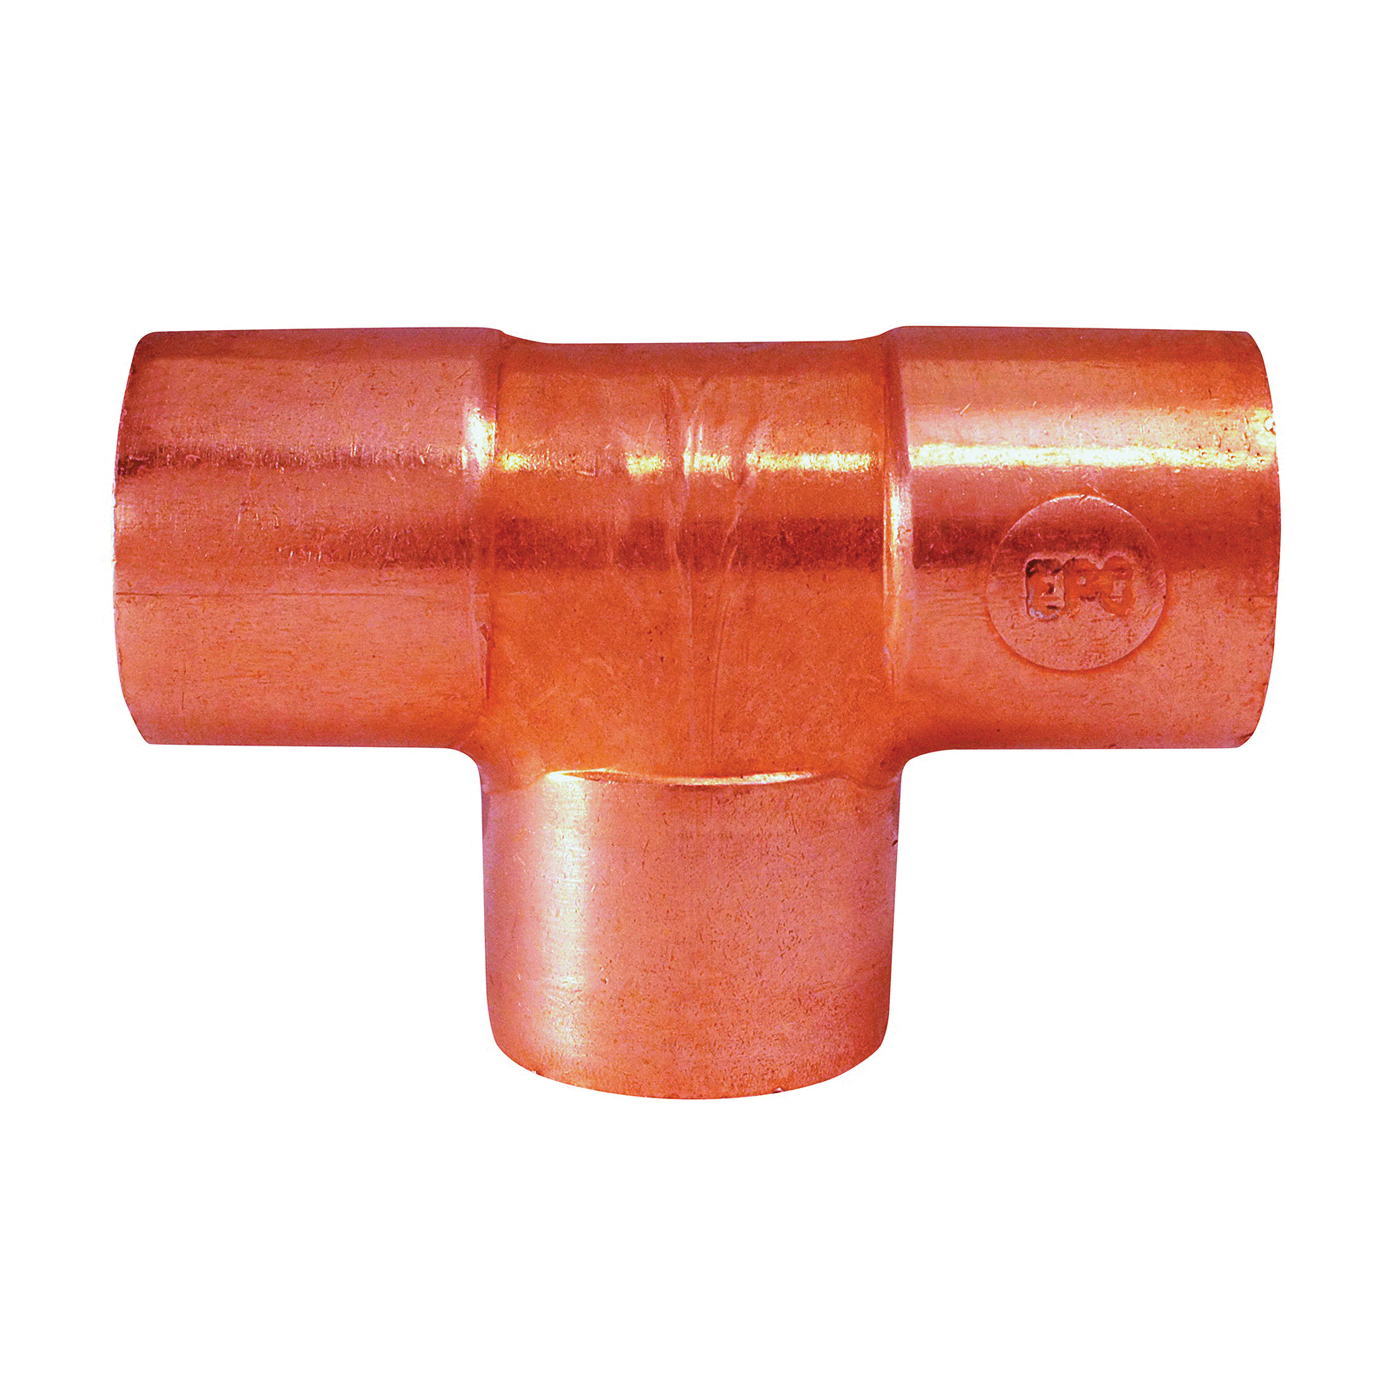 111 Series 32640 Pipe Tee, 1/4 in, Sweat, Copper